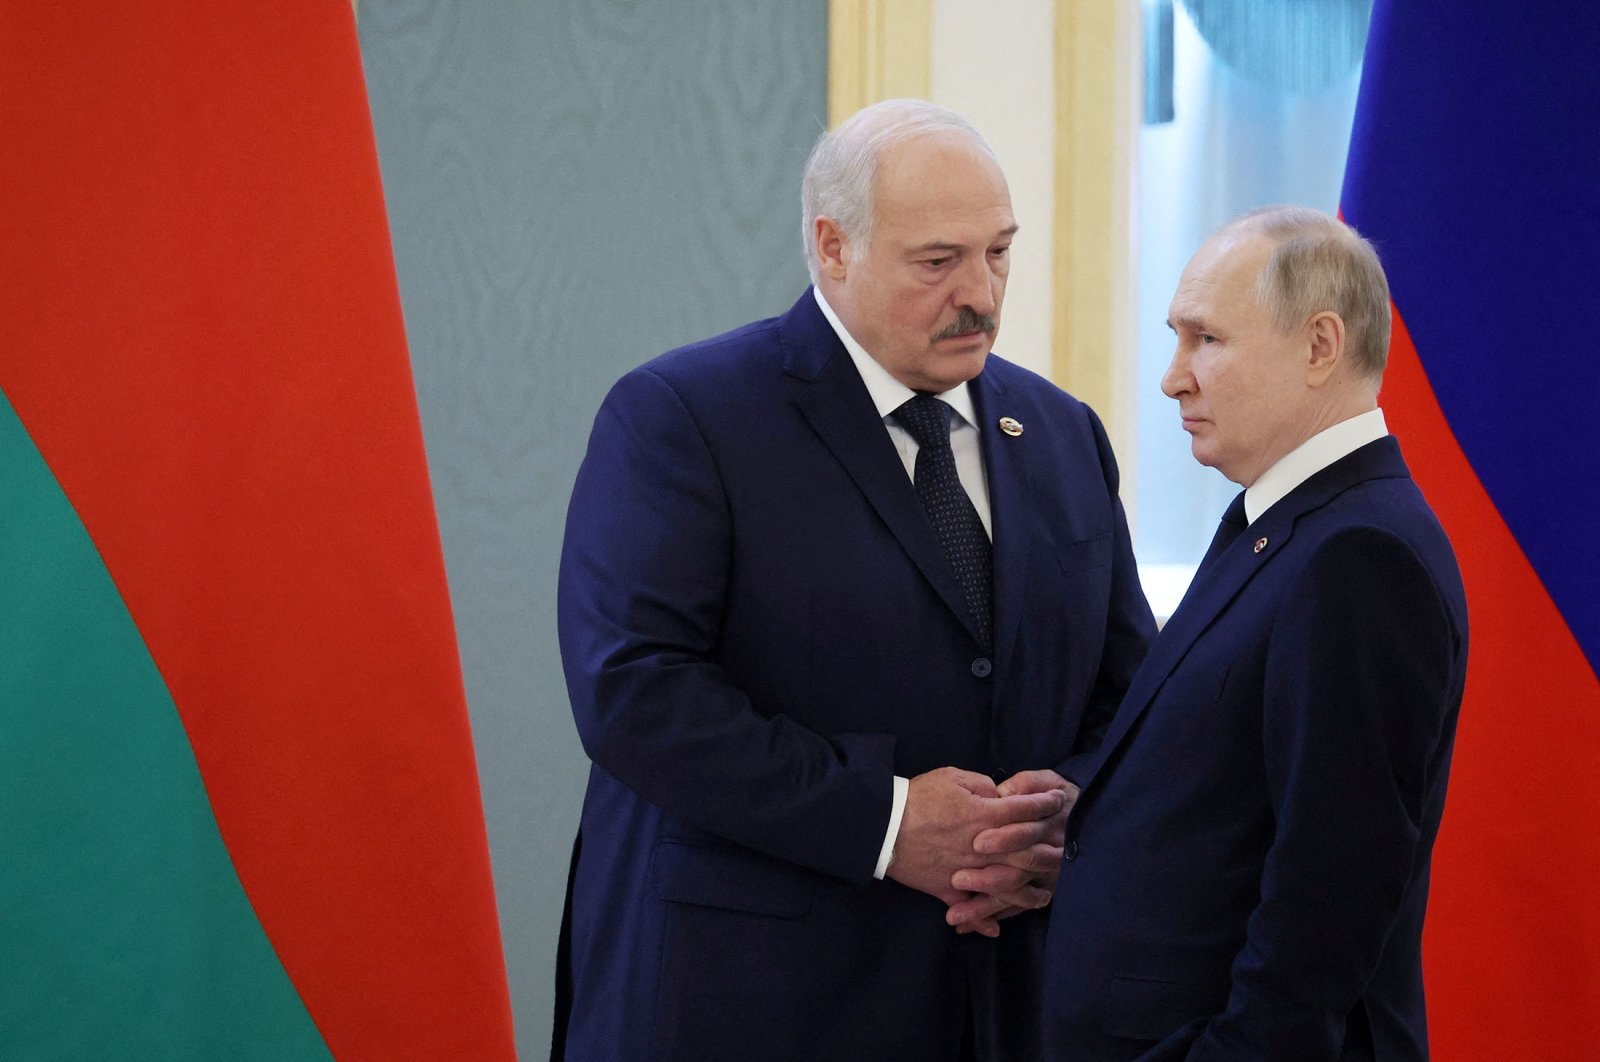 Russian President Vladimir Putin and Belarusian President Alexander Lukashenko attend a meeting of the Supreme State Council of the Union State of Russia and Belarus at the Kremlin in Moscow, Russia, April 6, 2023. (Reuters Photo)